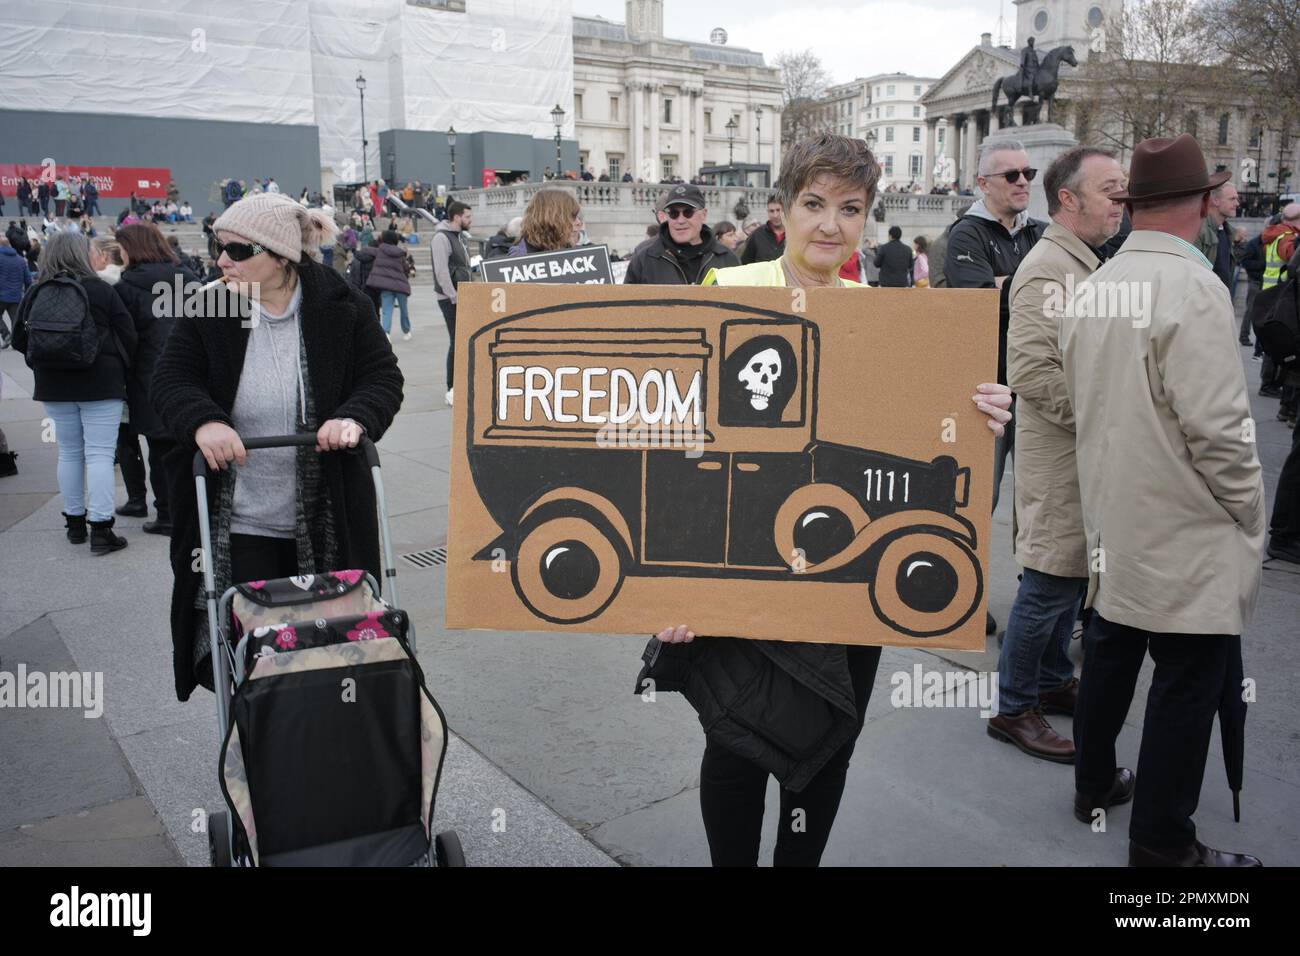 London/UK. 15 APR 2023. As the city major Sadiq Khan faces legal challenges over the expansion of ULEZ (ultra-low emission zone), those opposed to the expansion held a rally in Trafalgar Square. Aubrey Fagon/Alamy Live News Stock Photo